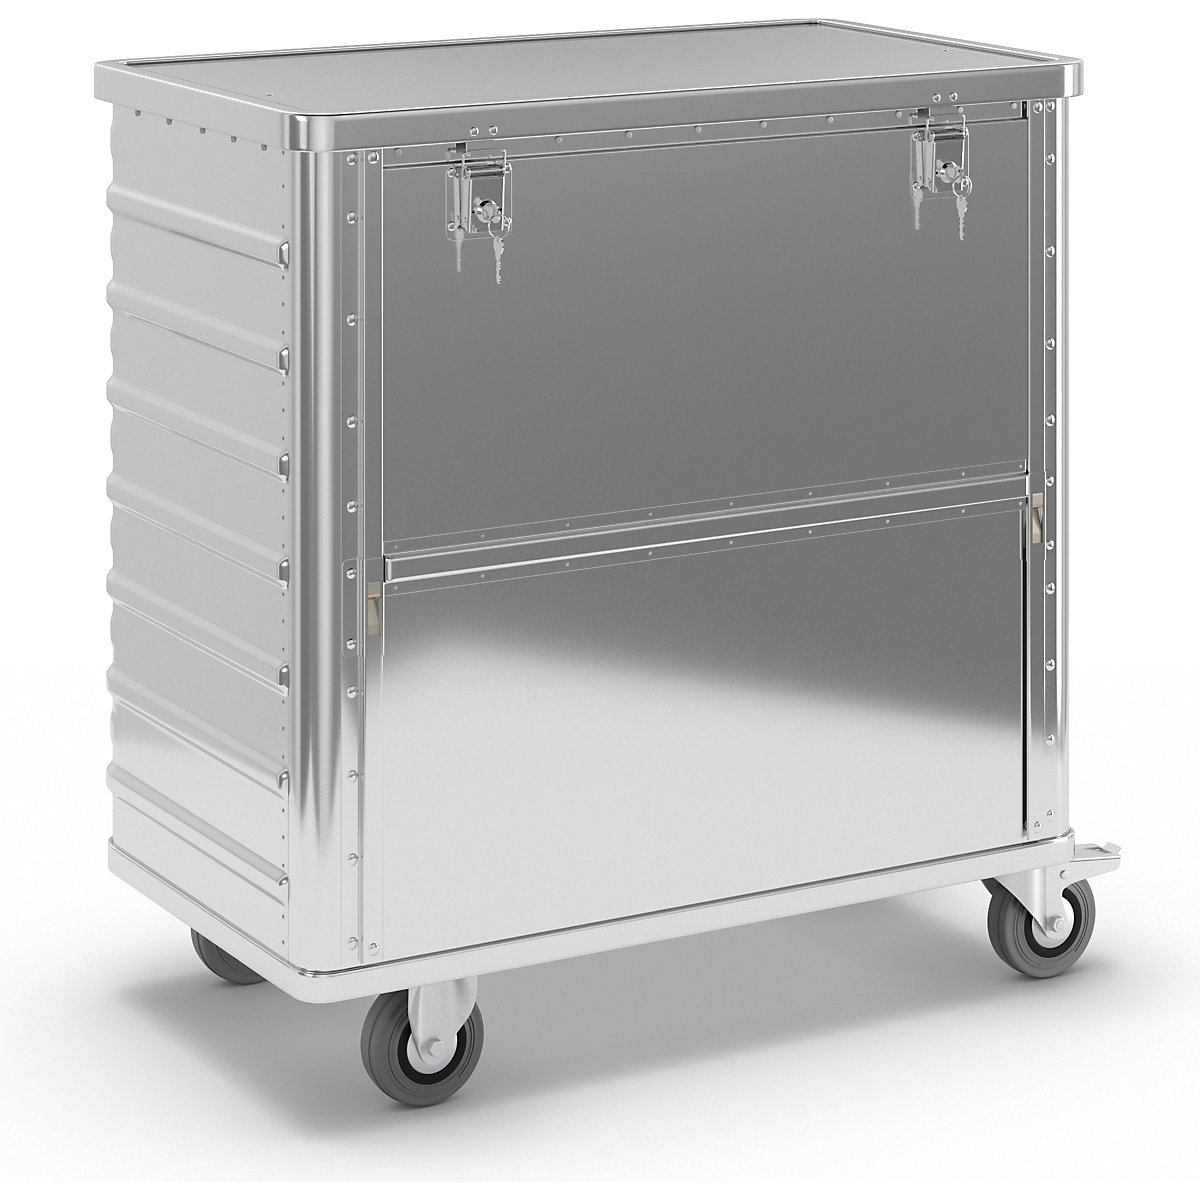 Aluminium container truck, fold down side panel – Gmöhling, with cover, lockable, capacity 355 l-1